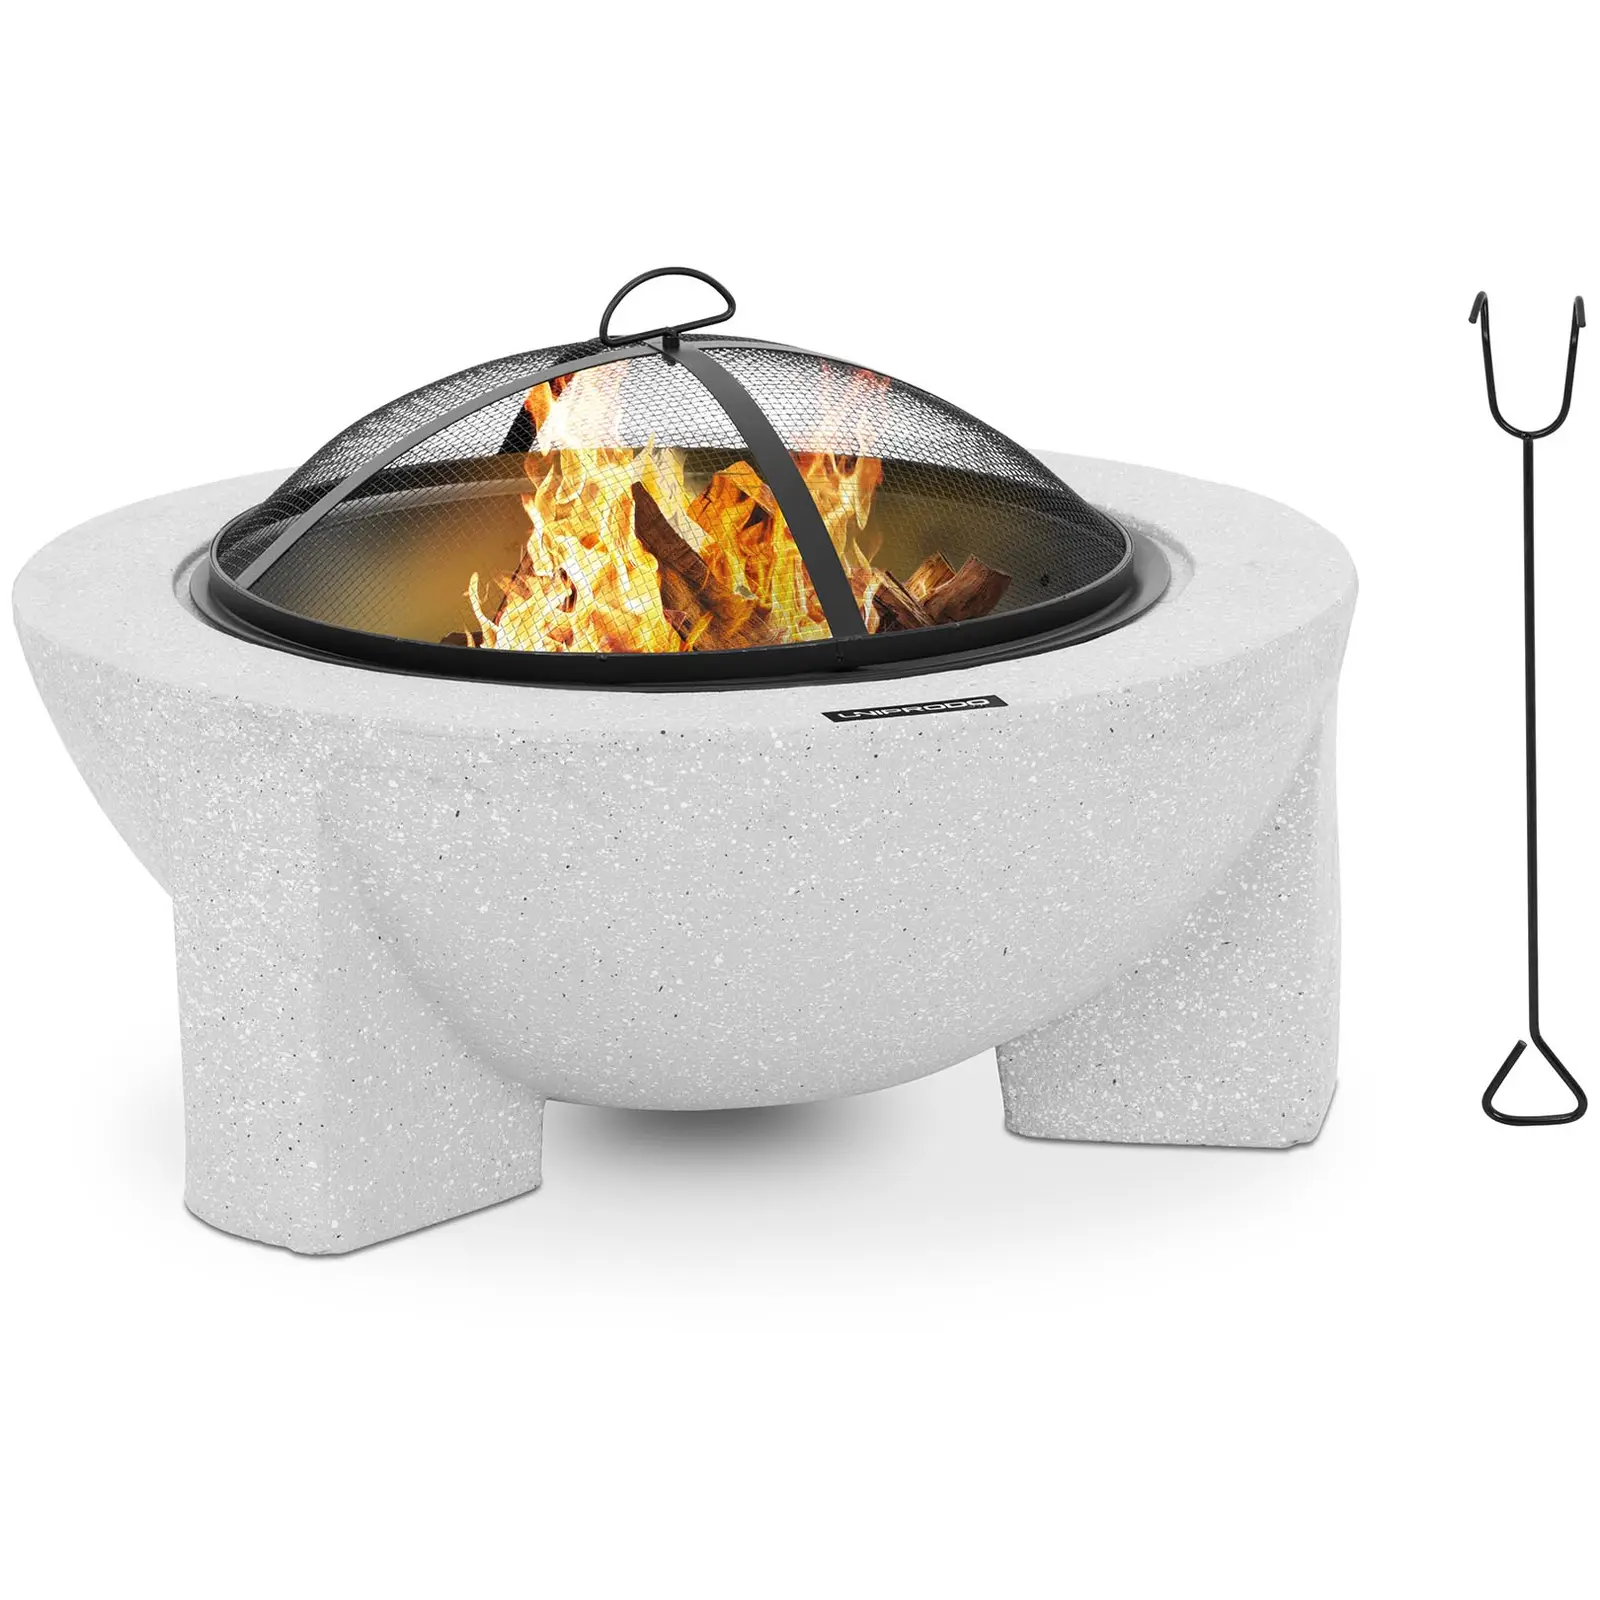 Fire bowl - with grill grate - dark gray -74 x74 x48 cm